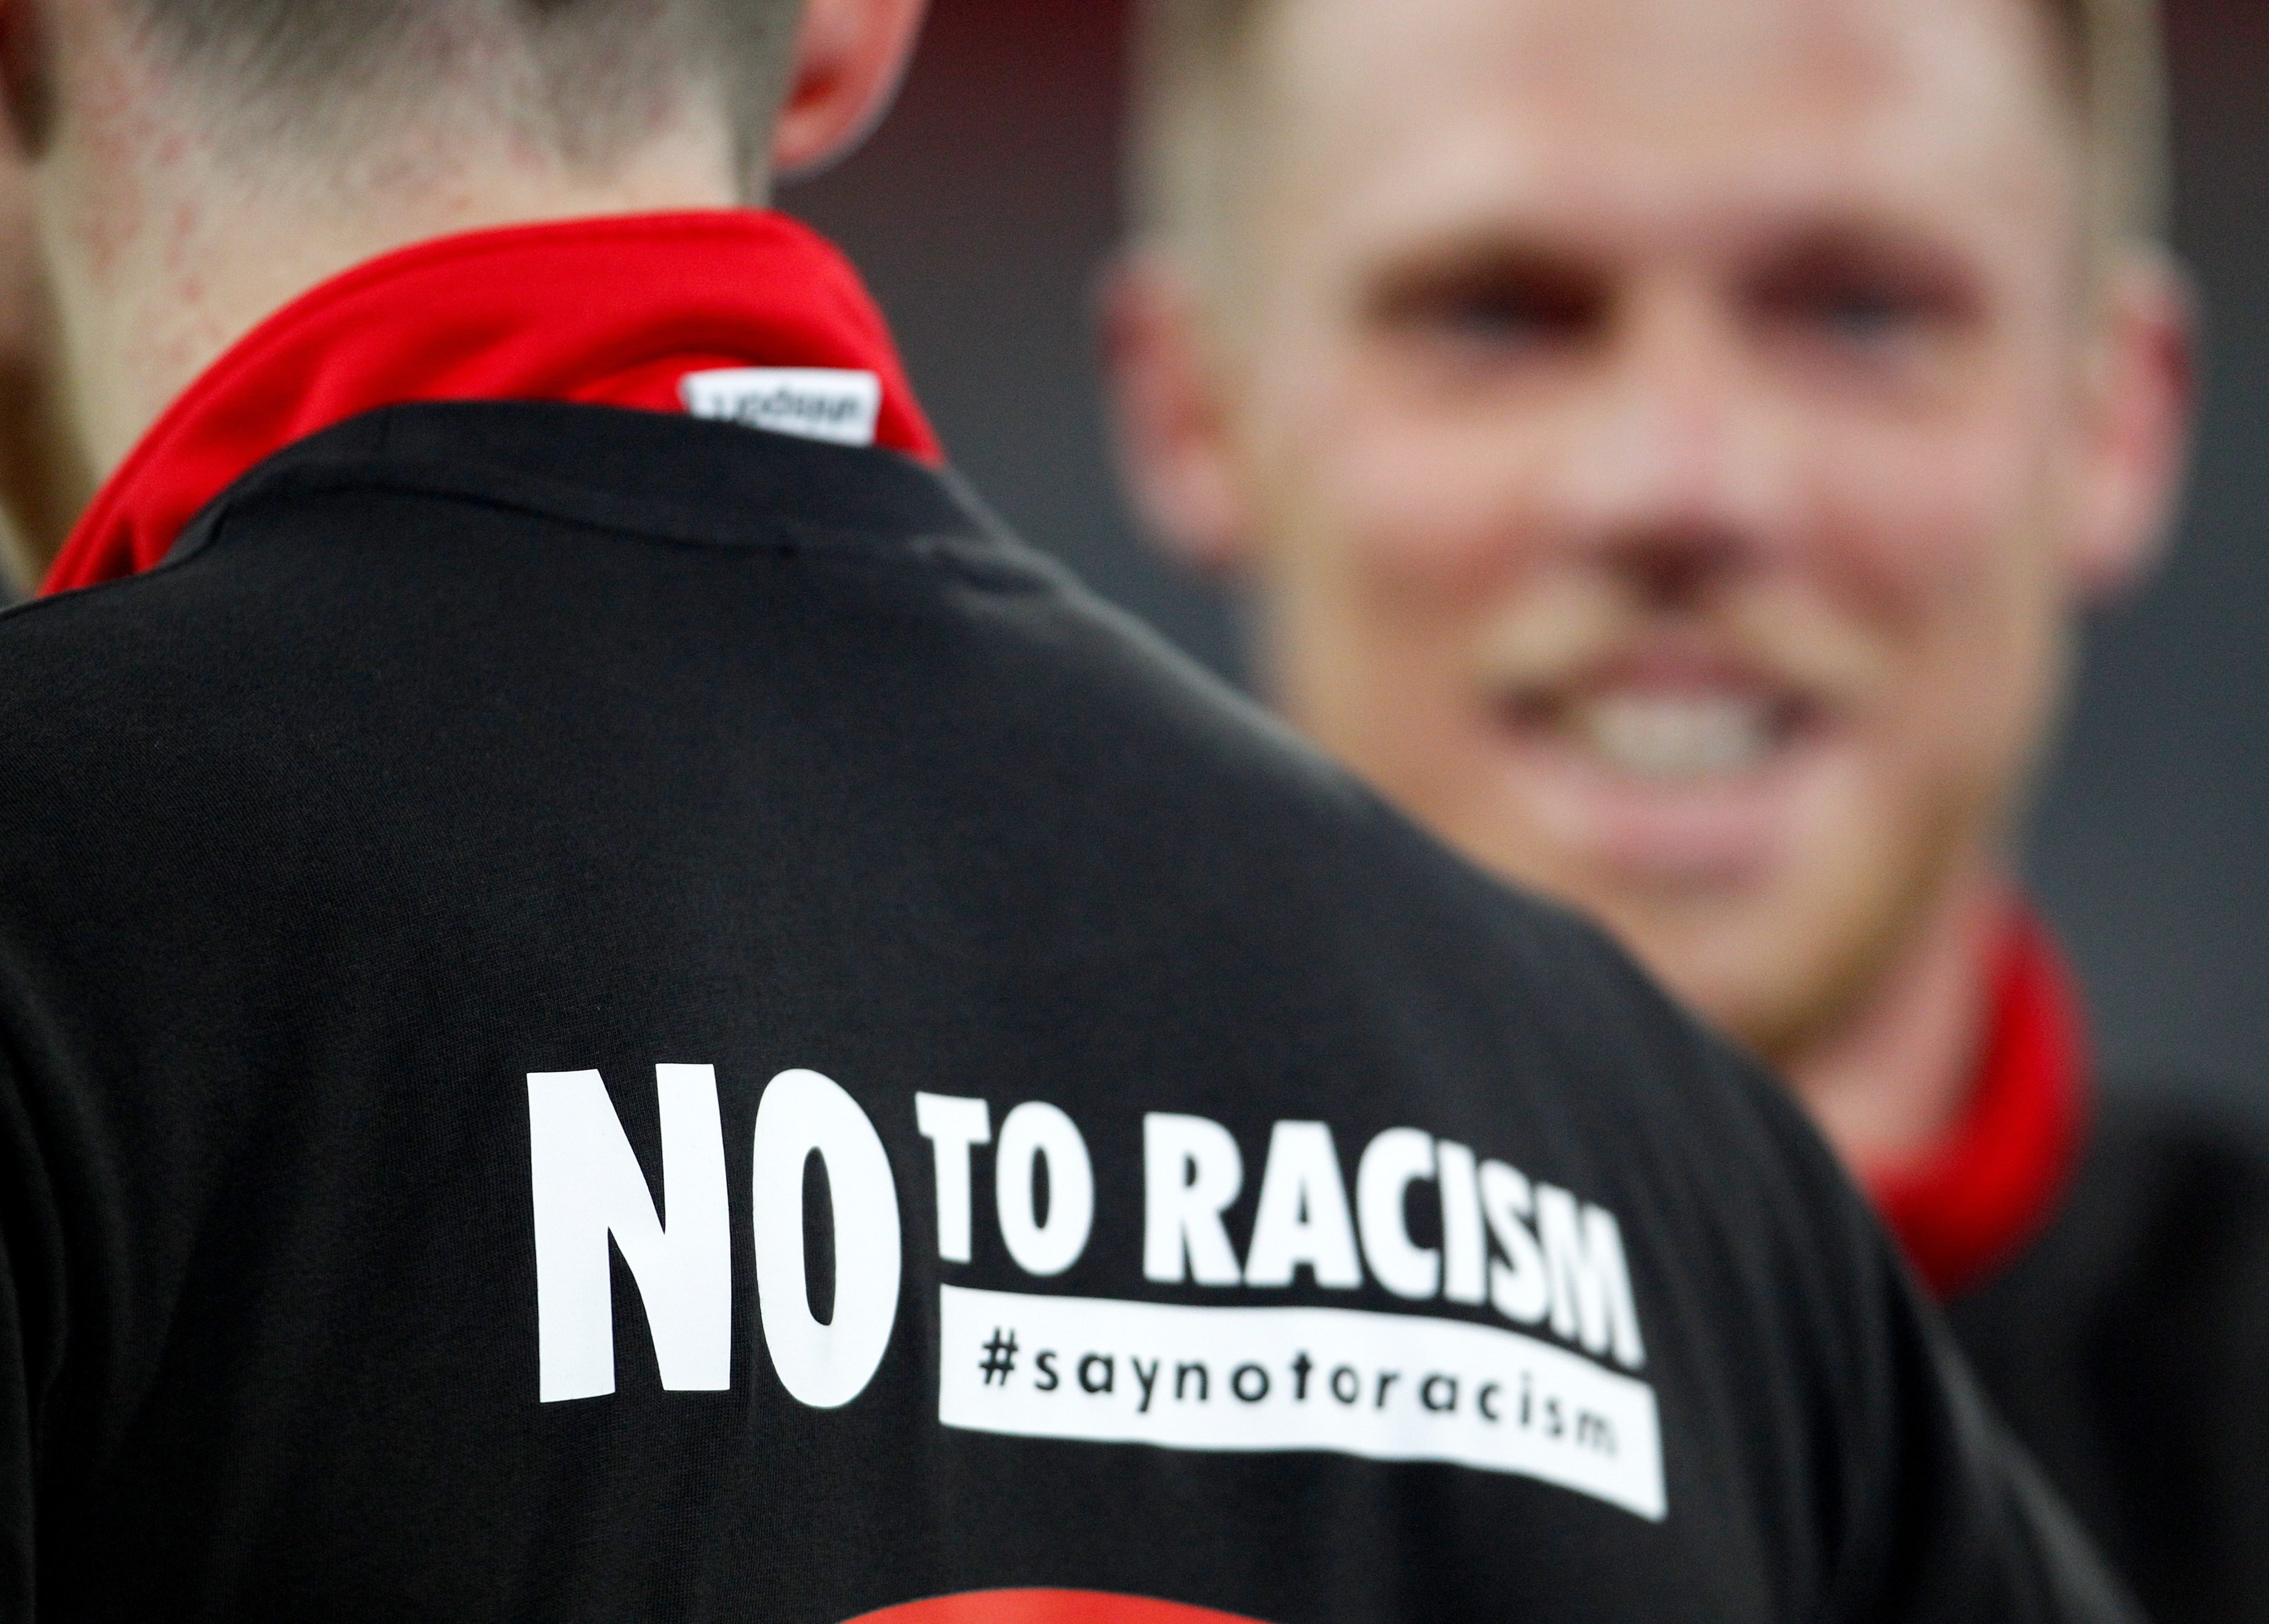 The message “No to Racism” is written on the warm-up shirt of a Düsseldorf player ahead of the German 2nd Bundesliga match between Fortuna Duesseldorf and VfL Bochum at the Merkur Spiel-Arena. Photo: DPA